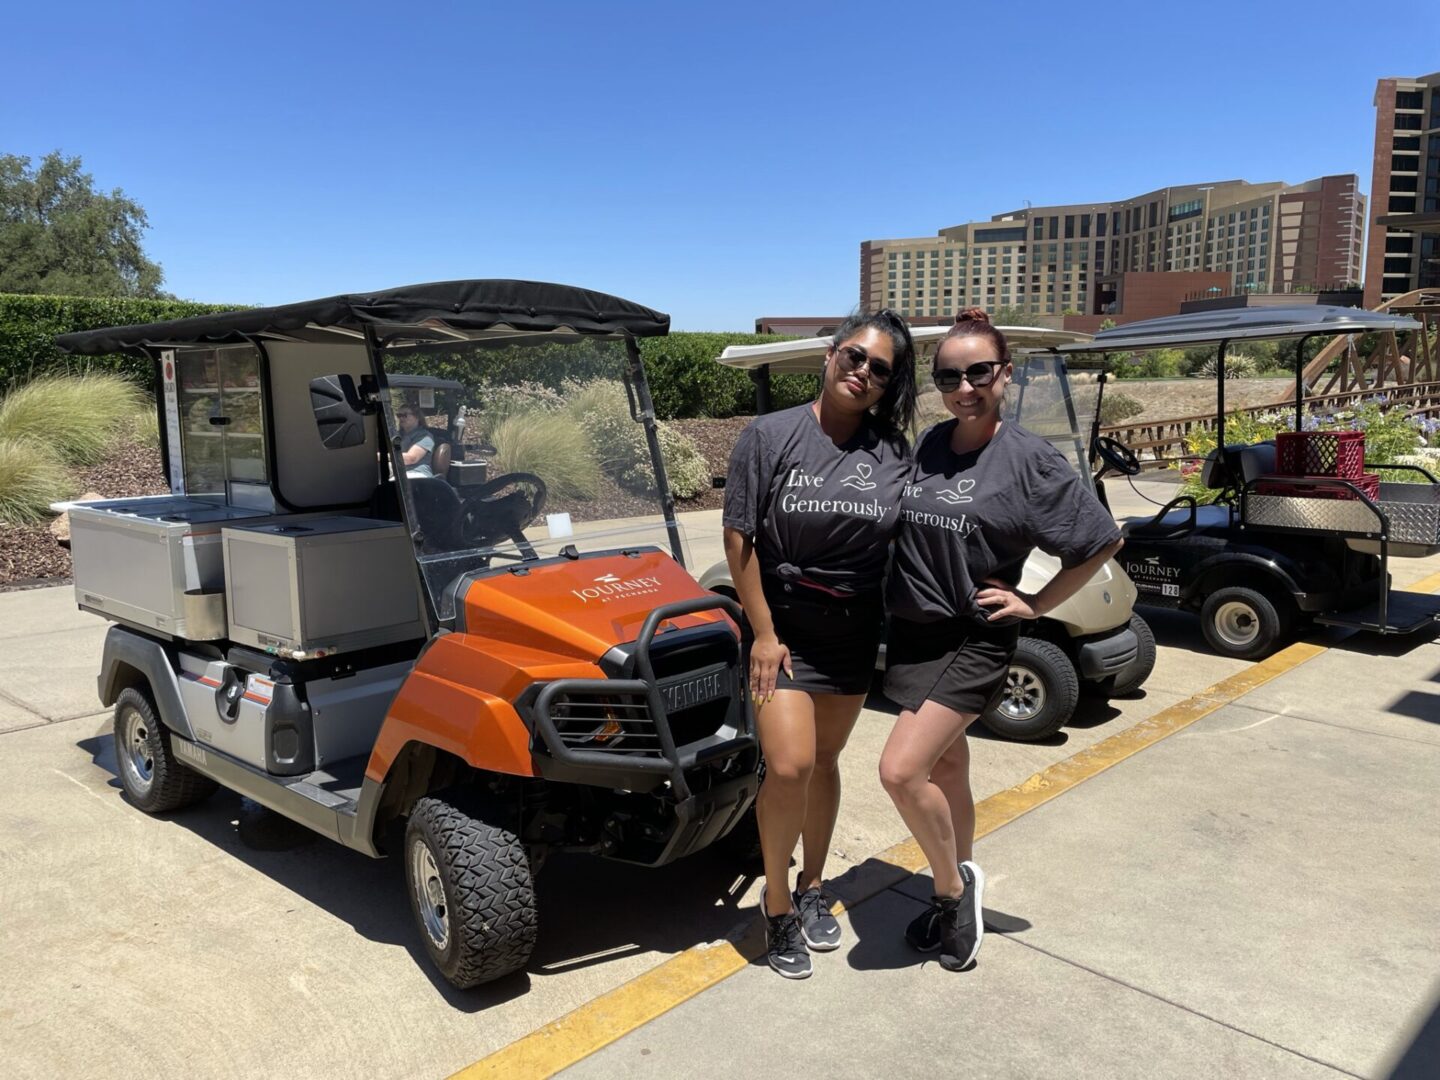 Beer Girls with Charity Shirts in Front of Golf Carts